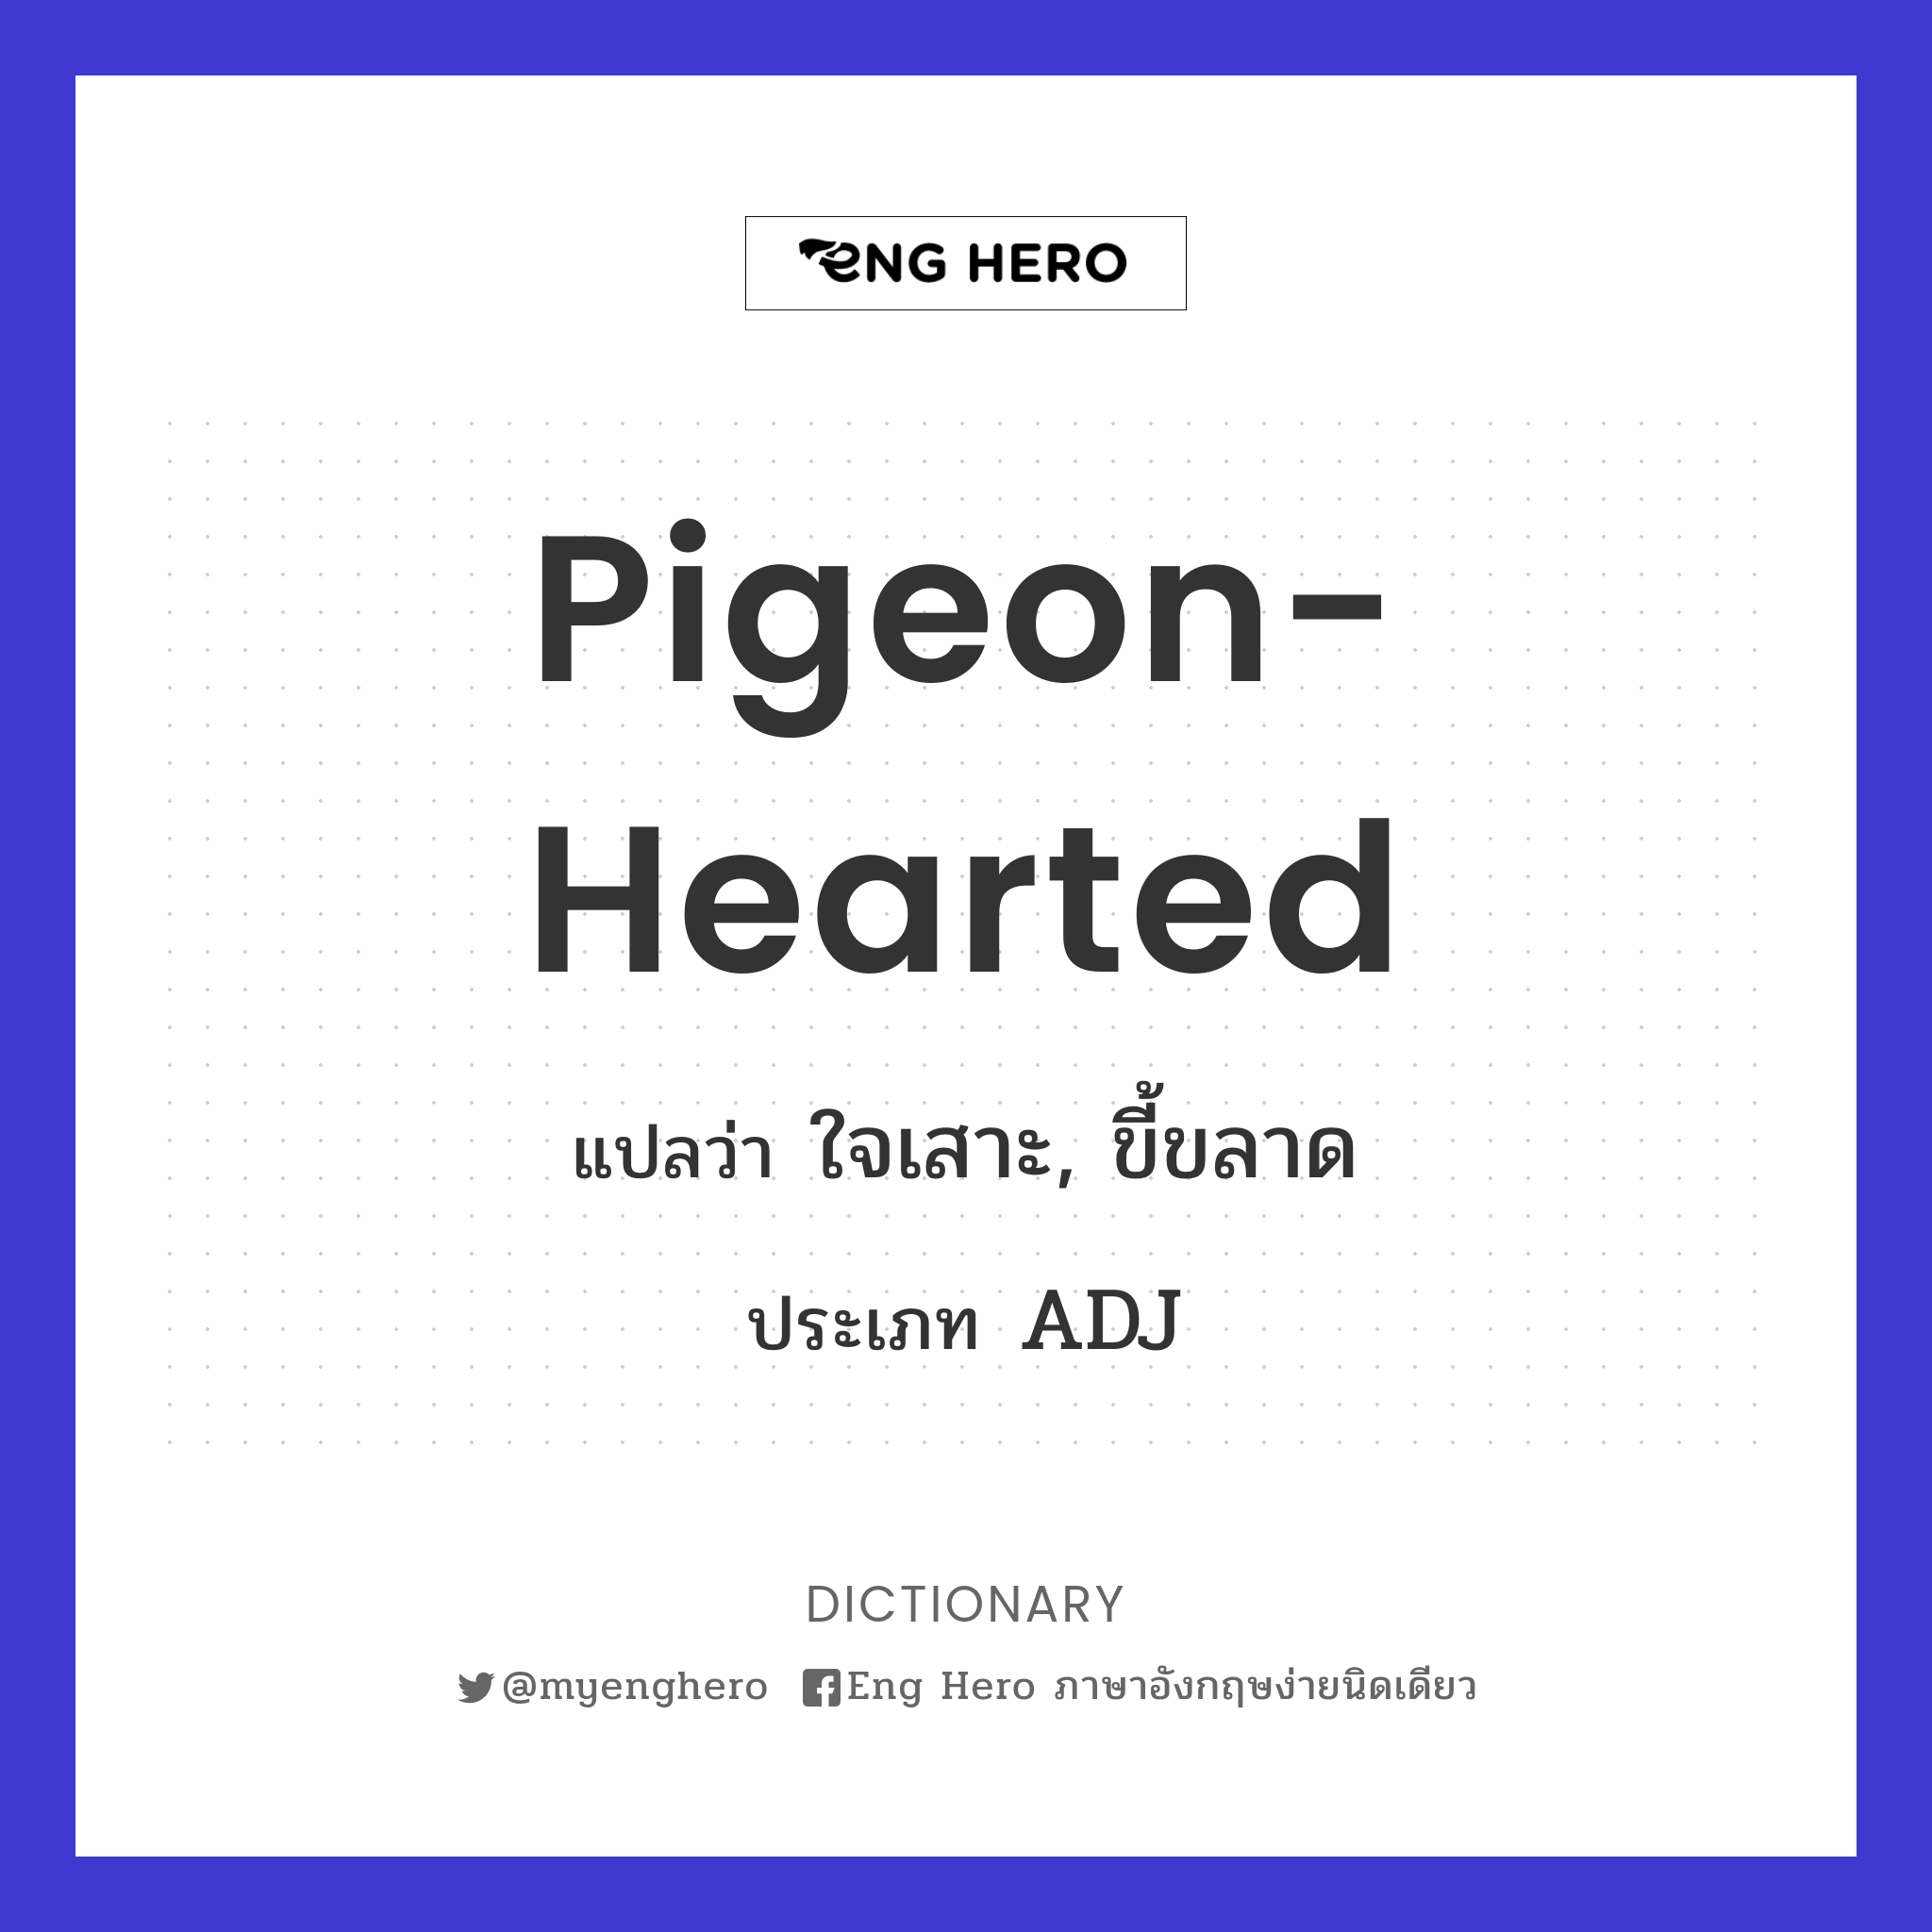 pigeon-hearted